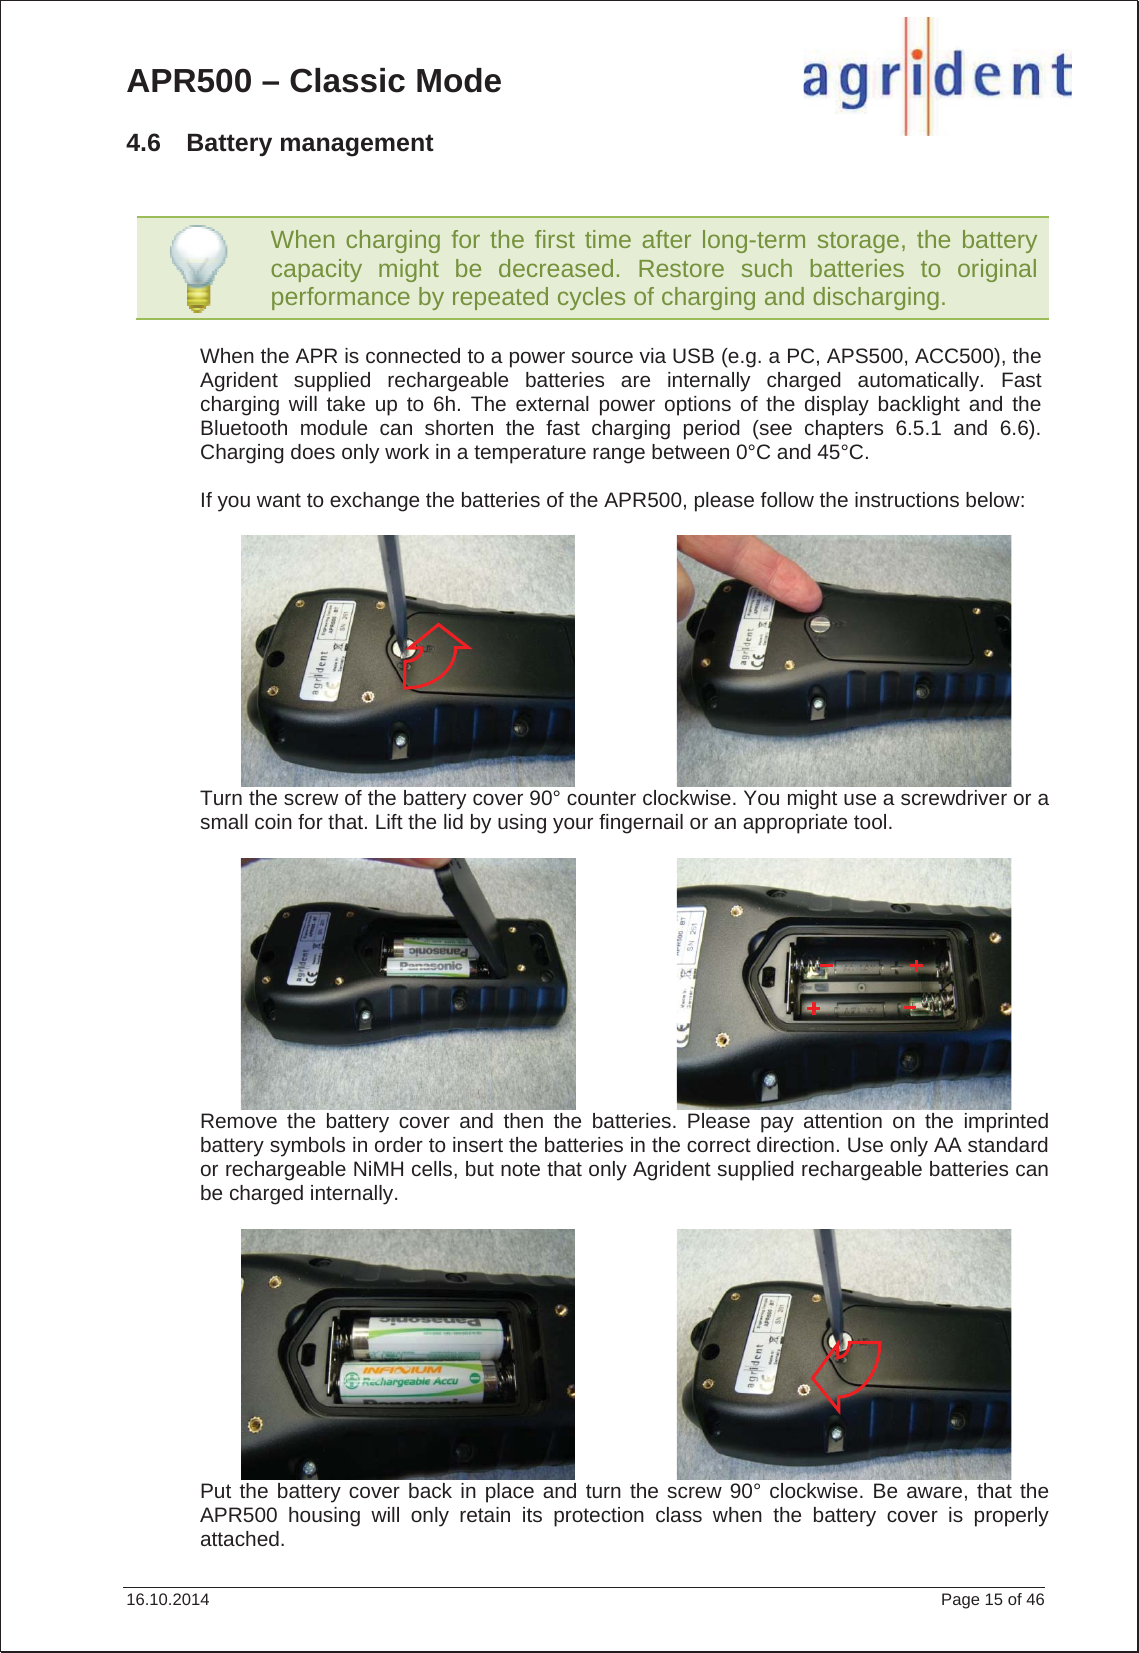 APR500 – Classic Mode 16.10.2014    Page 15 of 46 4.6 Battery management When the APR is connected to a power source via USB (e.g. a PC, APS500, ACC500), the Agrident supplied rechargeable batteries are internally charged automatically. Fast charging will take up to 6h. The external power options of the display backlight and the Bluetooth module can shorten the fast charging period (see chapters 6.5.1 and 6.6). Charging does only work in a temperature range between 0°C and 45°C. If you want to exchange the batteries of the APR500, please follow the instructions below: Turn the screw of the battery cover 90° counter clockwise. You might use a screwdriver or a small coin for that. Lift the lid by using your fingernail or an appropriate tool. Remove the battery cover and then the batteries. Please pay attention on the imprinted battery symbols in order to insert the batteries in the correct direction. Use only AA standard or rechargeable NiMH cells, but note that only Agrident supplied rechargeable batteries can be charged internally. Put the battery cover back in place and turn the screw 90° clockwise. Be aware, that the APR500 housing will only retain its protection class when the battery cover is properly attached. When charging for the first time after long-term storage, the battery capacity might be decreased. Restore such batteries to original performance by repeated cycles of charging and discharging.